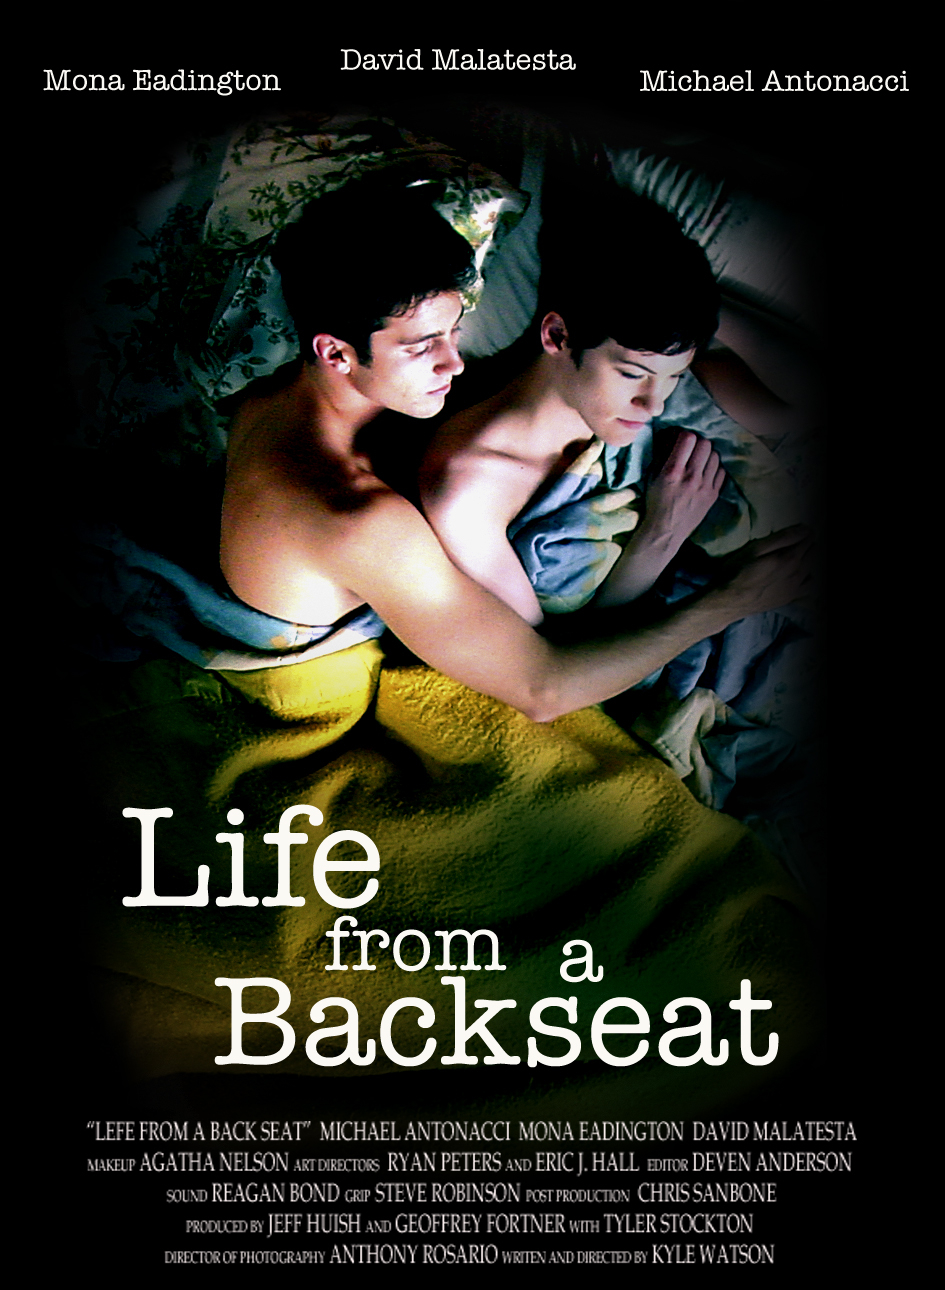 The movie poster from the short film, LIFE FROM A BACKSEAT.